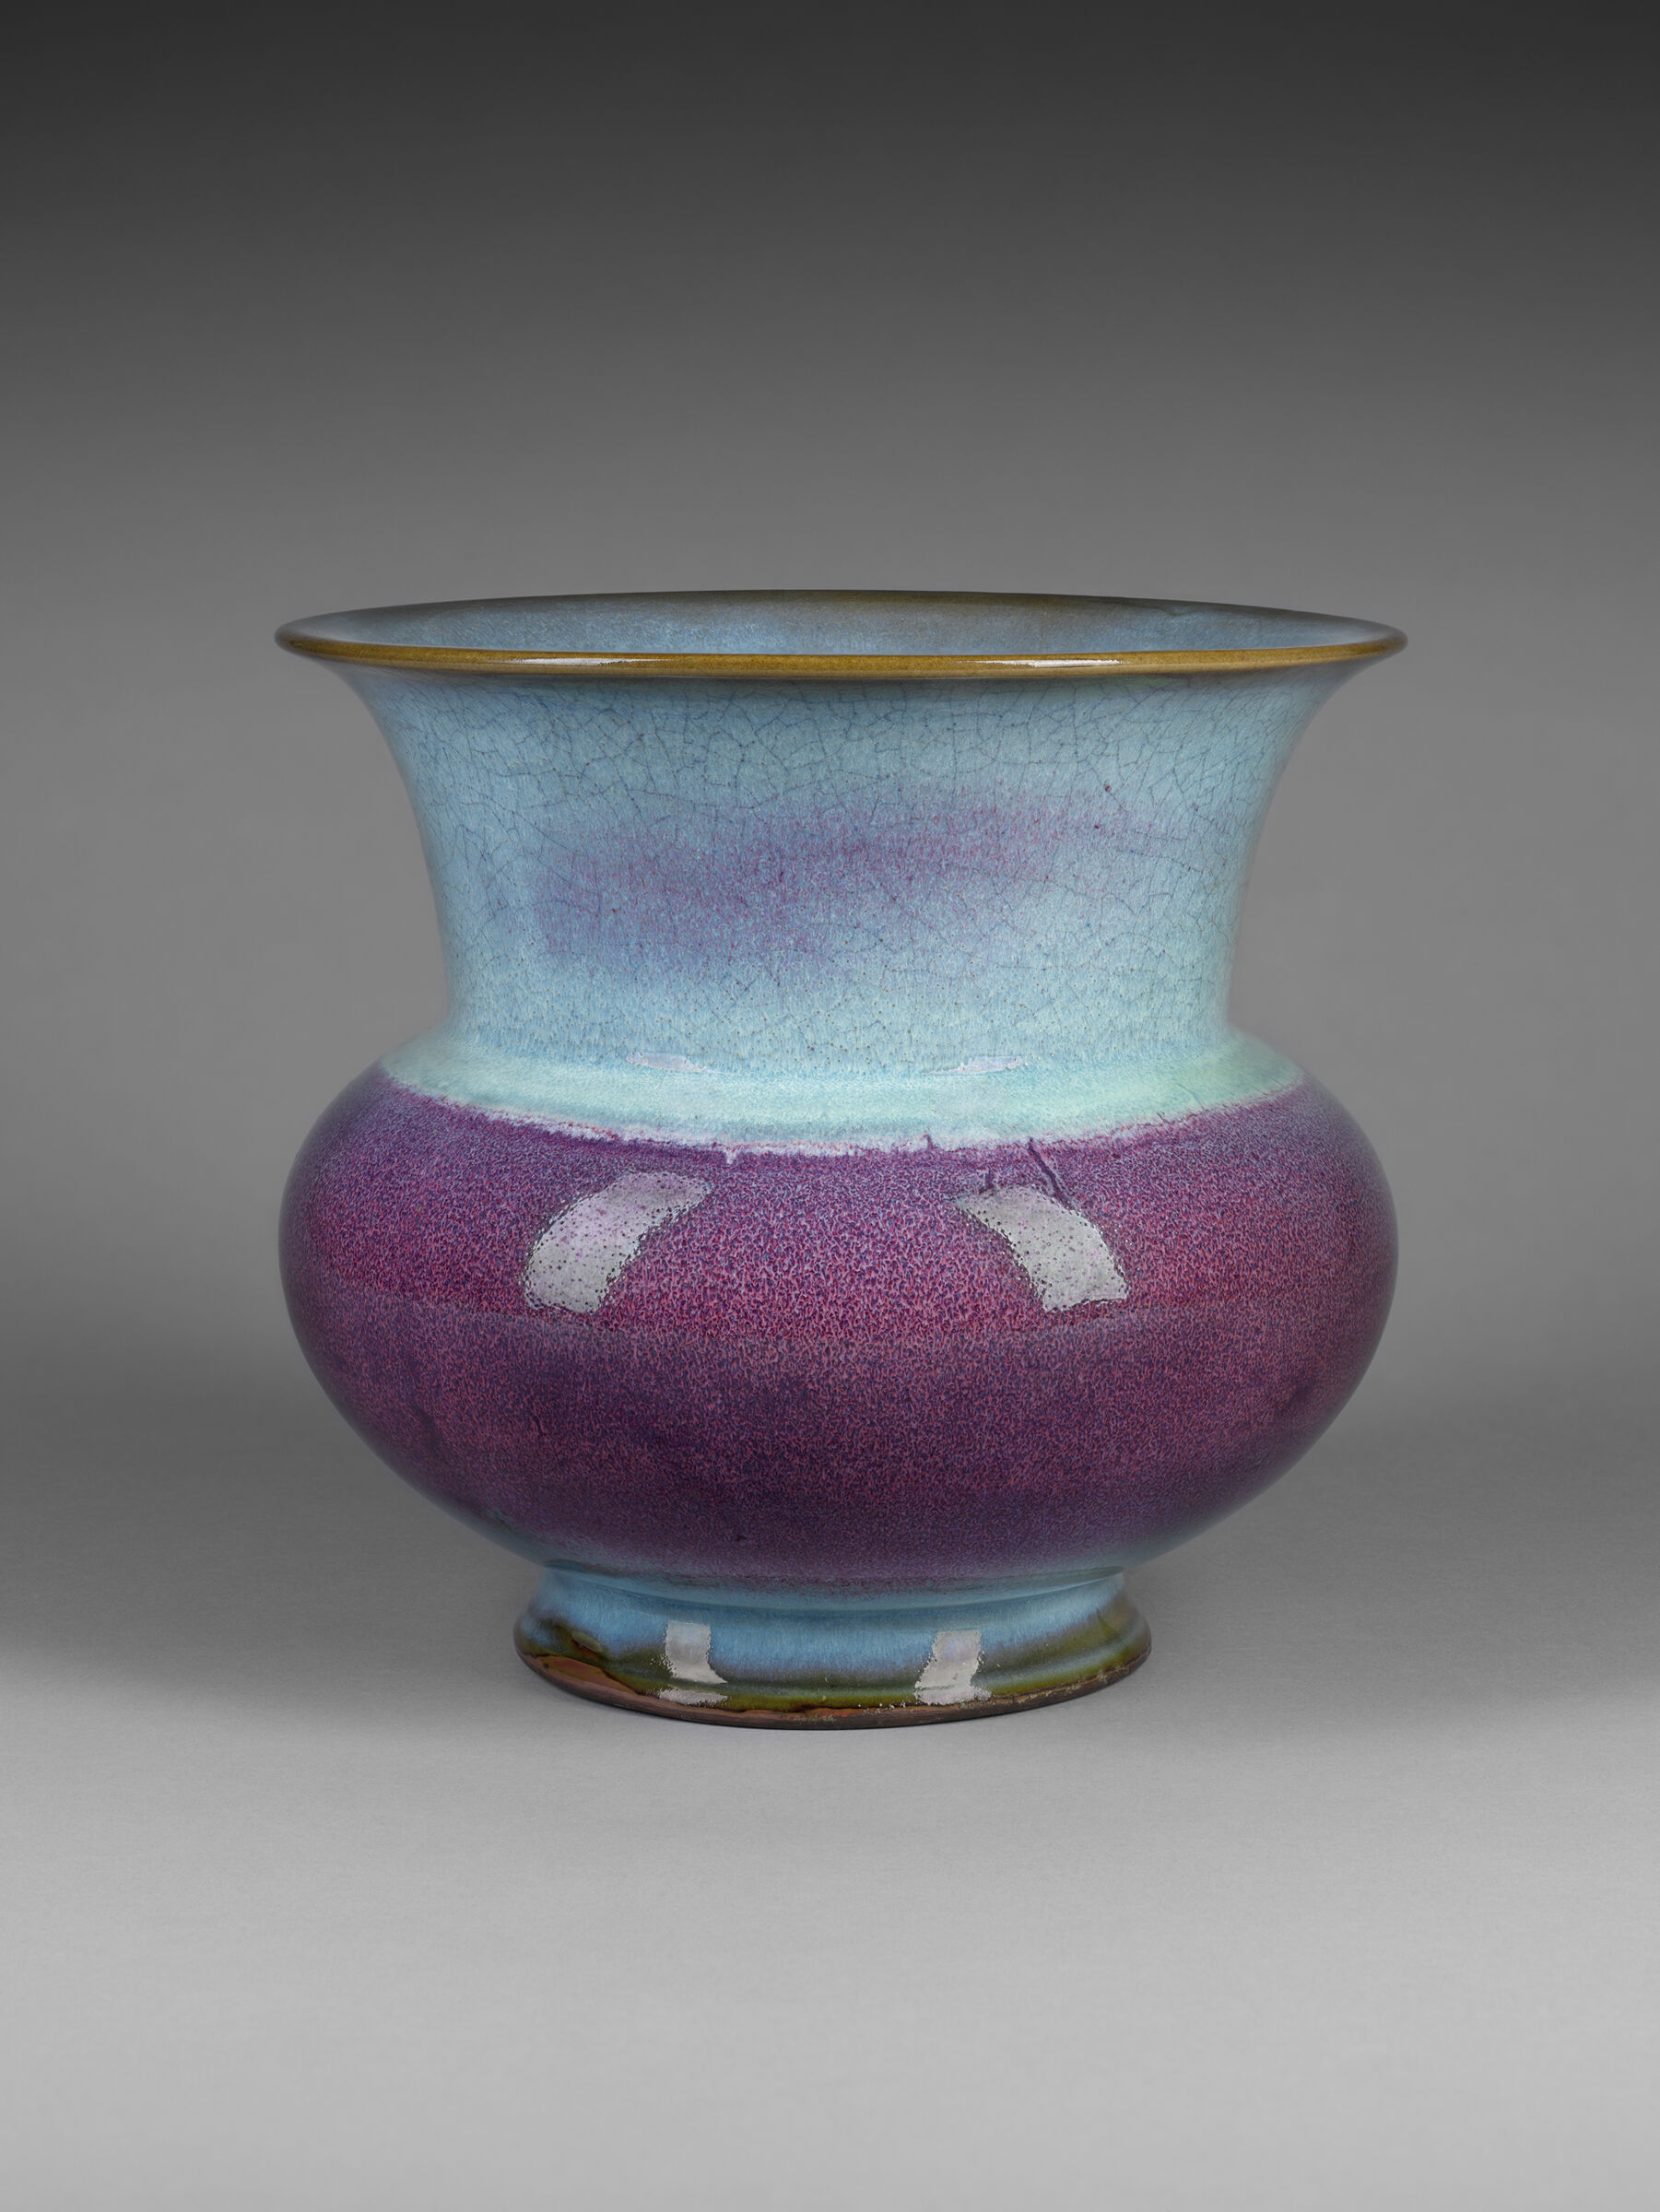 Zhadou-Shaped Flowerpot With Globular Body And Flaring Mouth